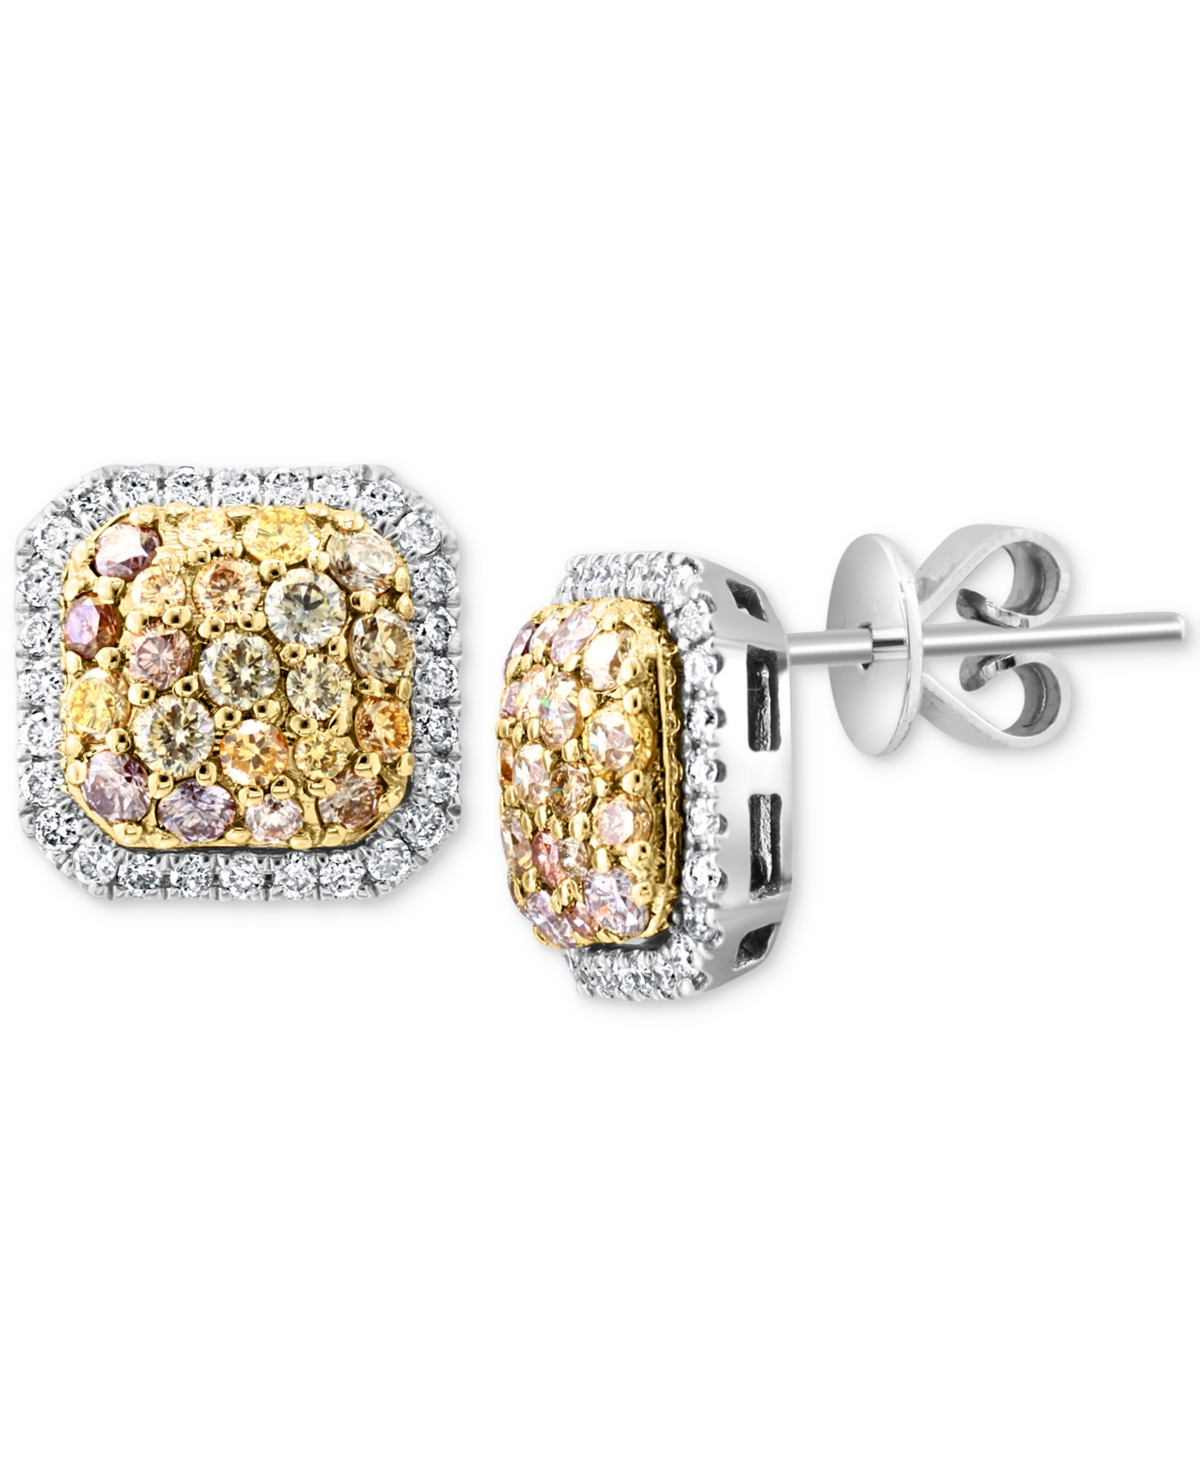 Effy Collection Effy Multicolor Diamond (5/8 ct. t.w.) & White Diamond (1/4 ct. t.w.) Halo Cluster Stud Earrings in 14k Two-Tone Gold